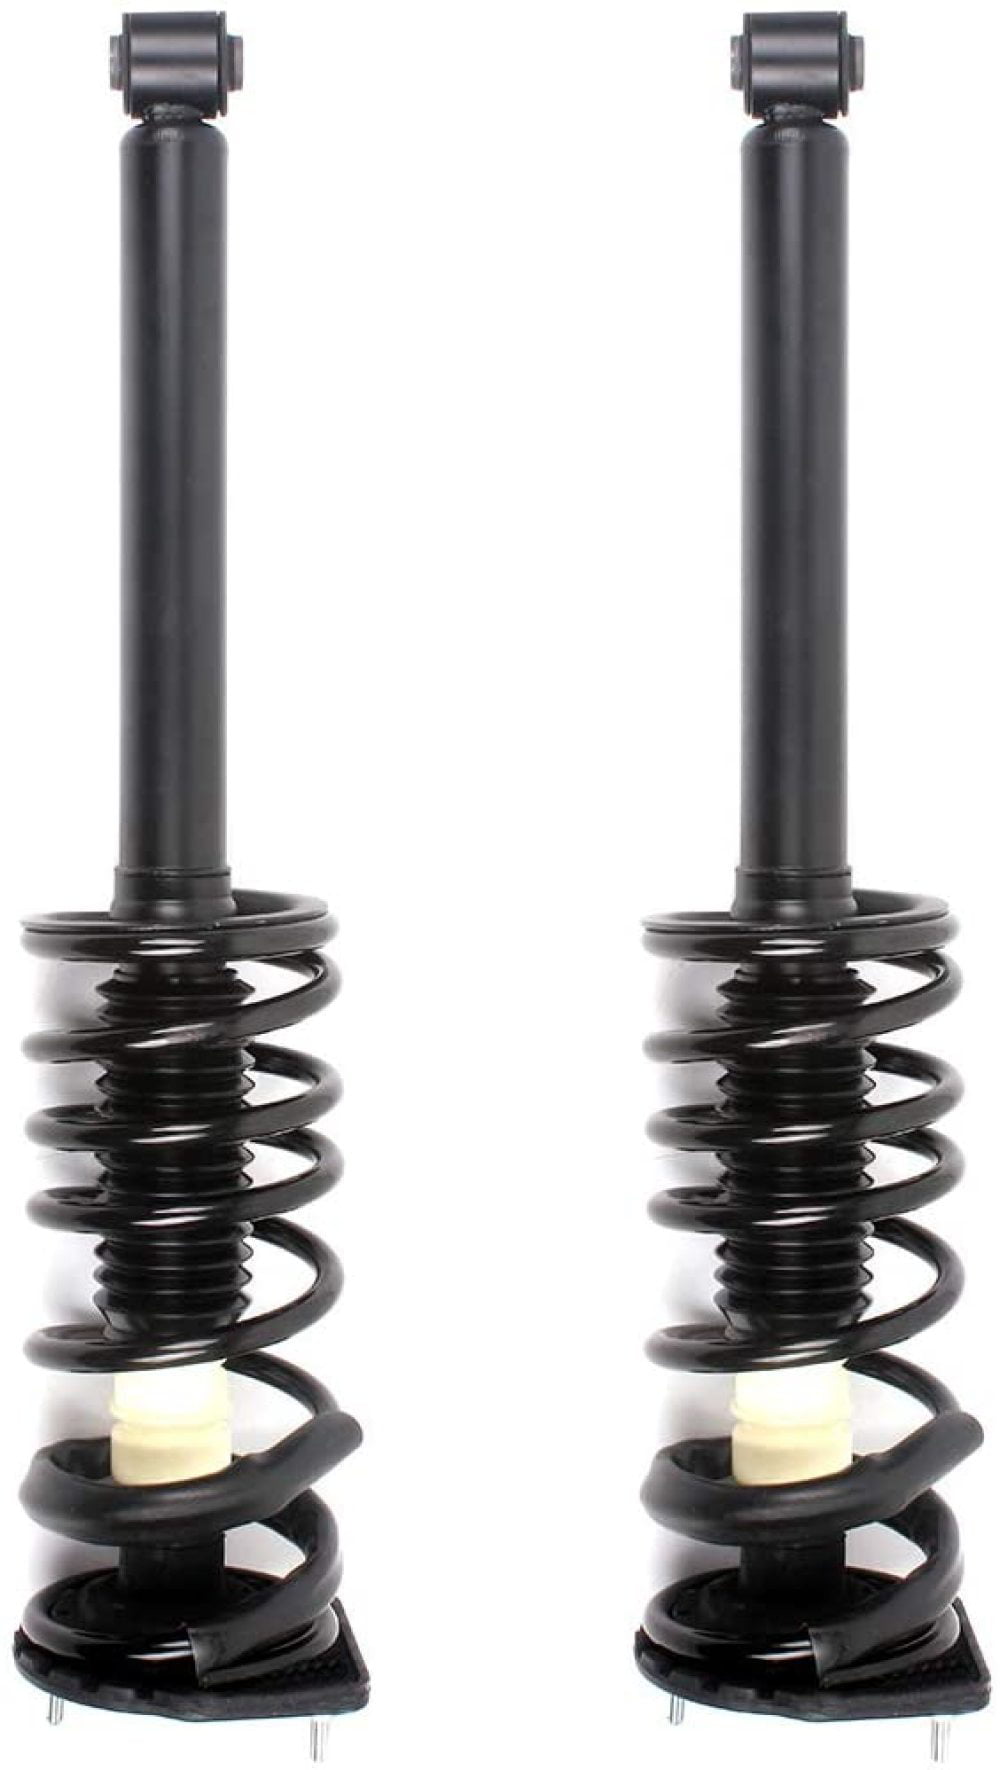 SCITOO Complete Strut Spring Assembly fit 1995 1996 1997 1998 1999 Chevrolet Cavalier,1995 1996 1997 1998 1999 Pontiac Sunfire Front Pair 